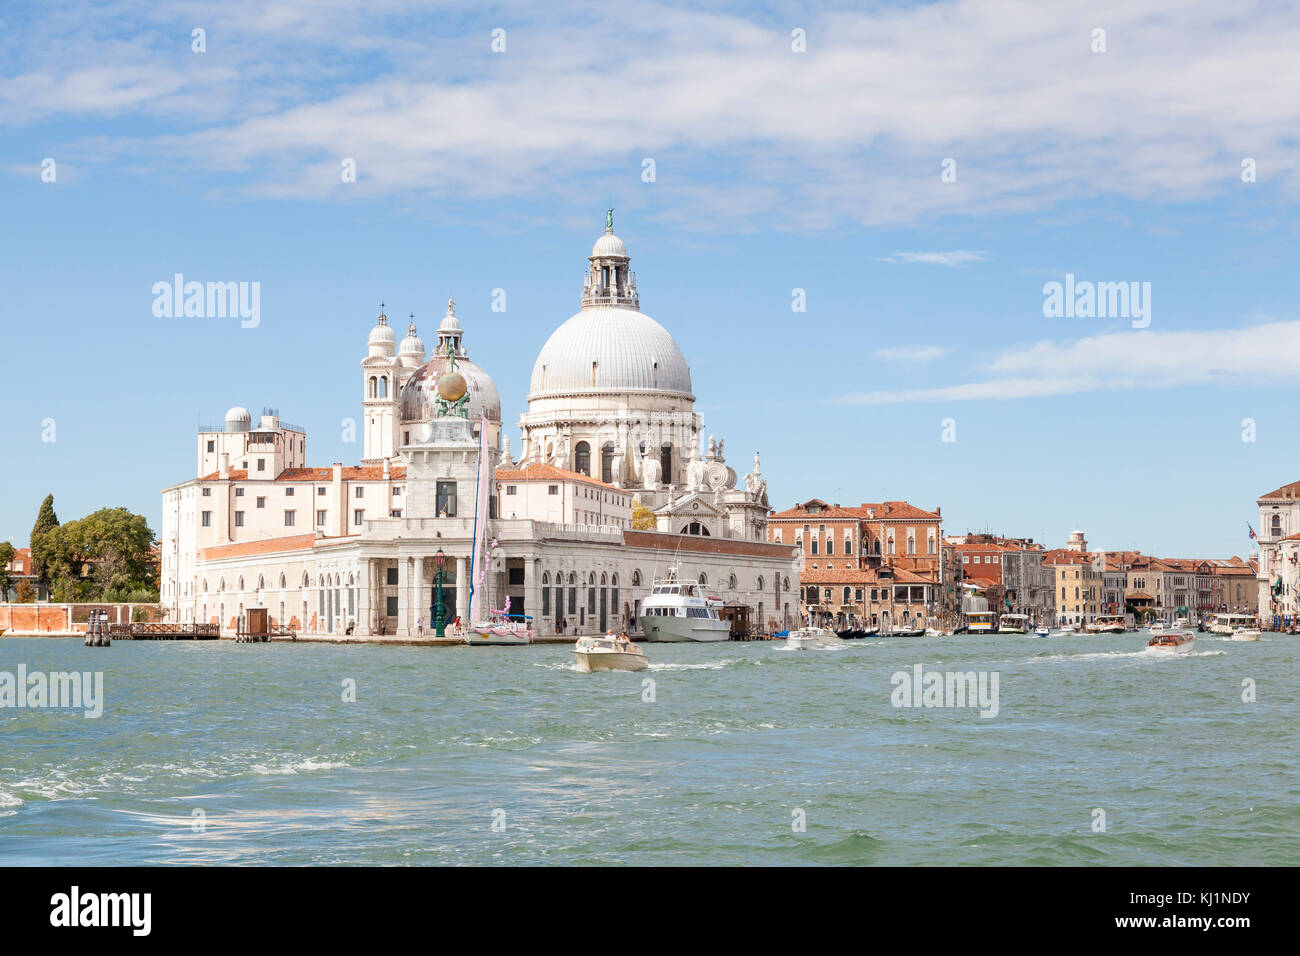 Punta della Dogana, Dorsoduro, Venice, Italy from the lagoon. This was the old Customs house sited at the entrance to the Grand Canal Stock Photo